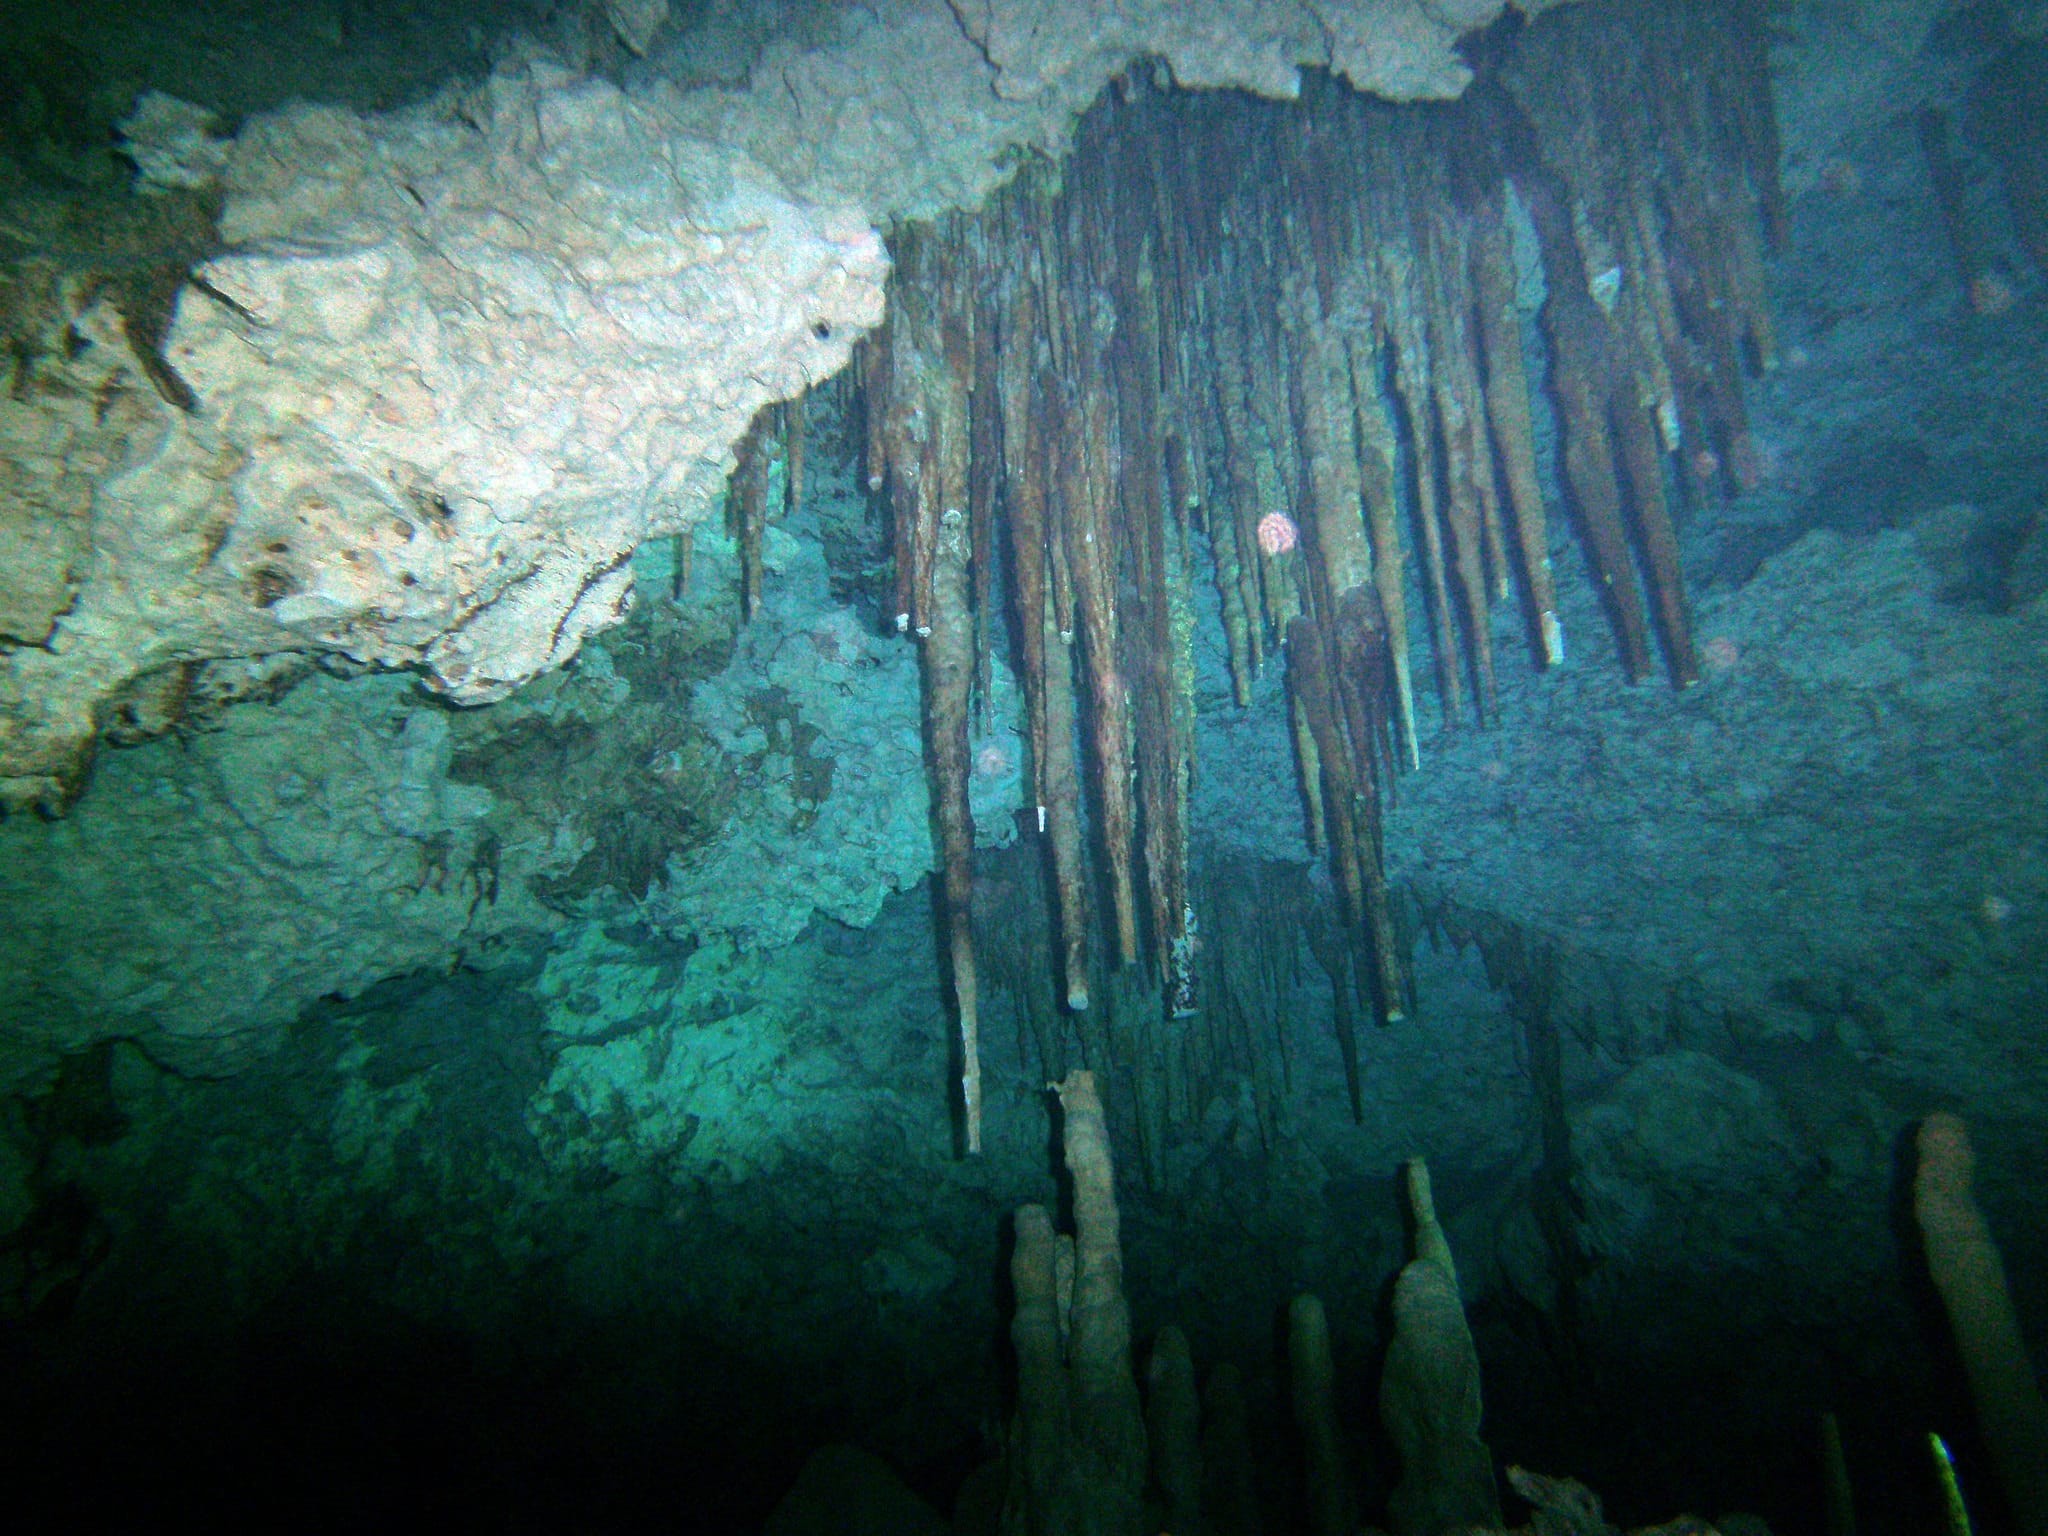 Stalactites in Kukulkan Chac Mool Cenote Mexico Photograph by amanderson2